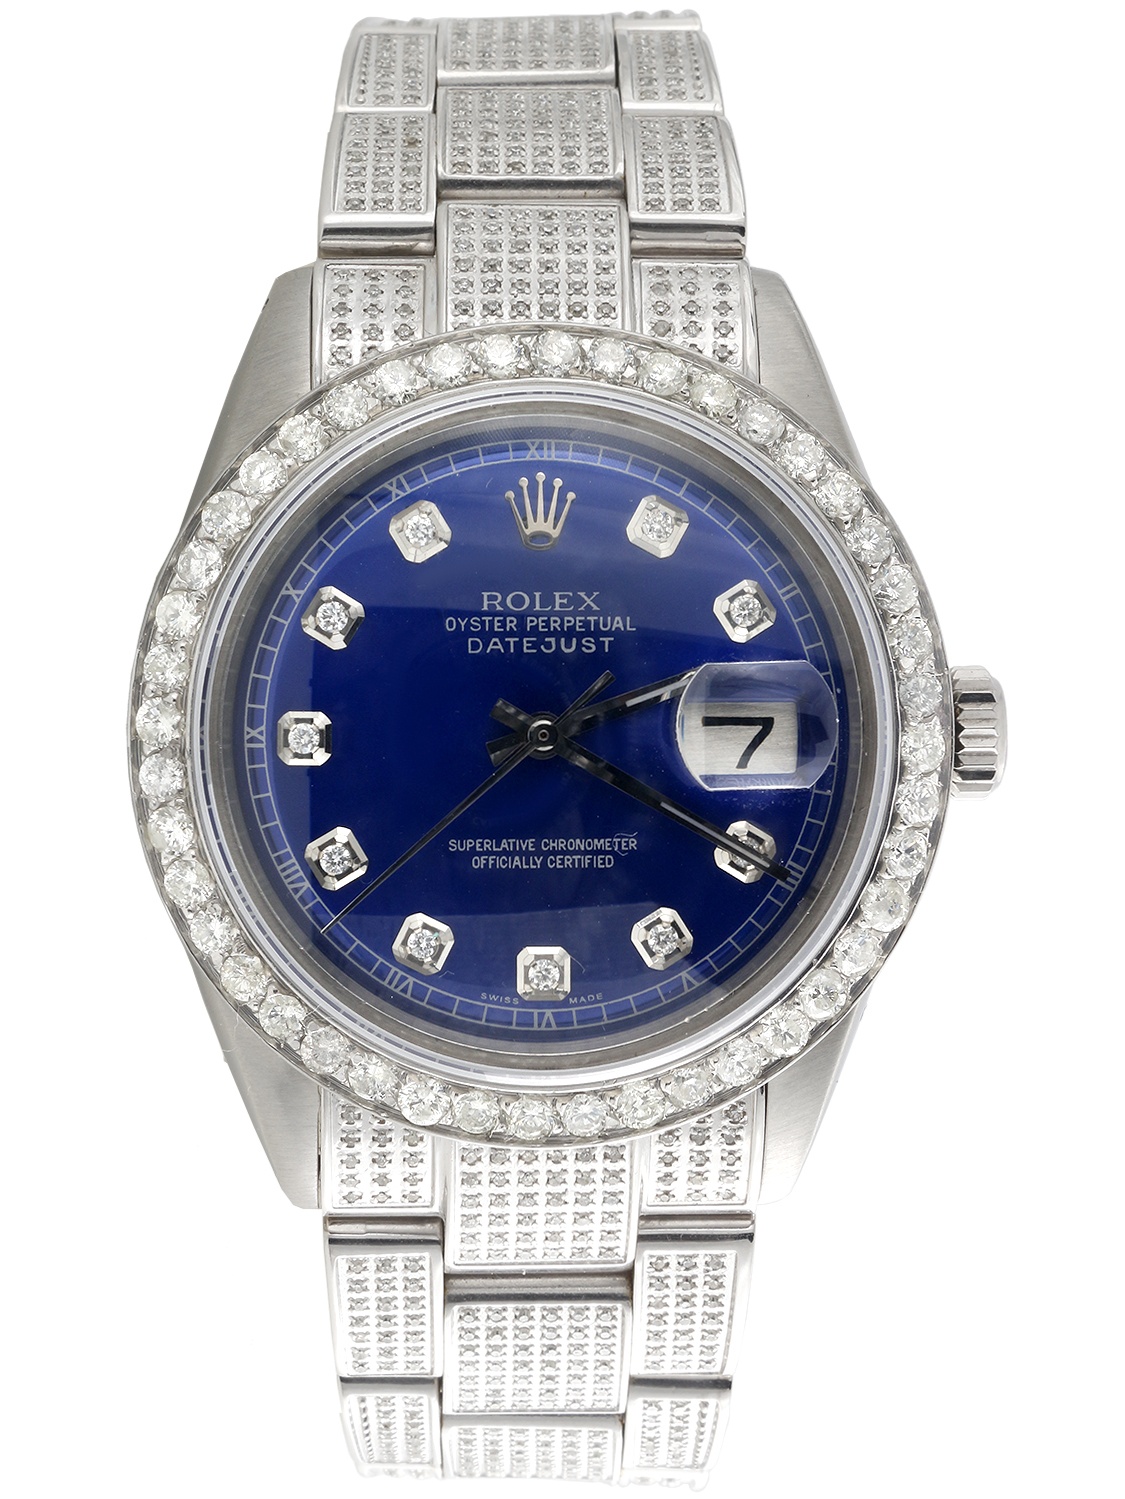 Mens Rolex 36mm DateJust Diamond Watch Fully Iced Band Custom Blue Dial 5.10 CT. - image 1 of 8